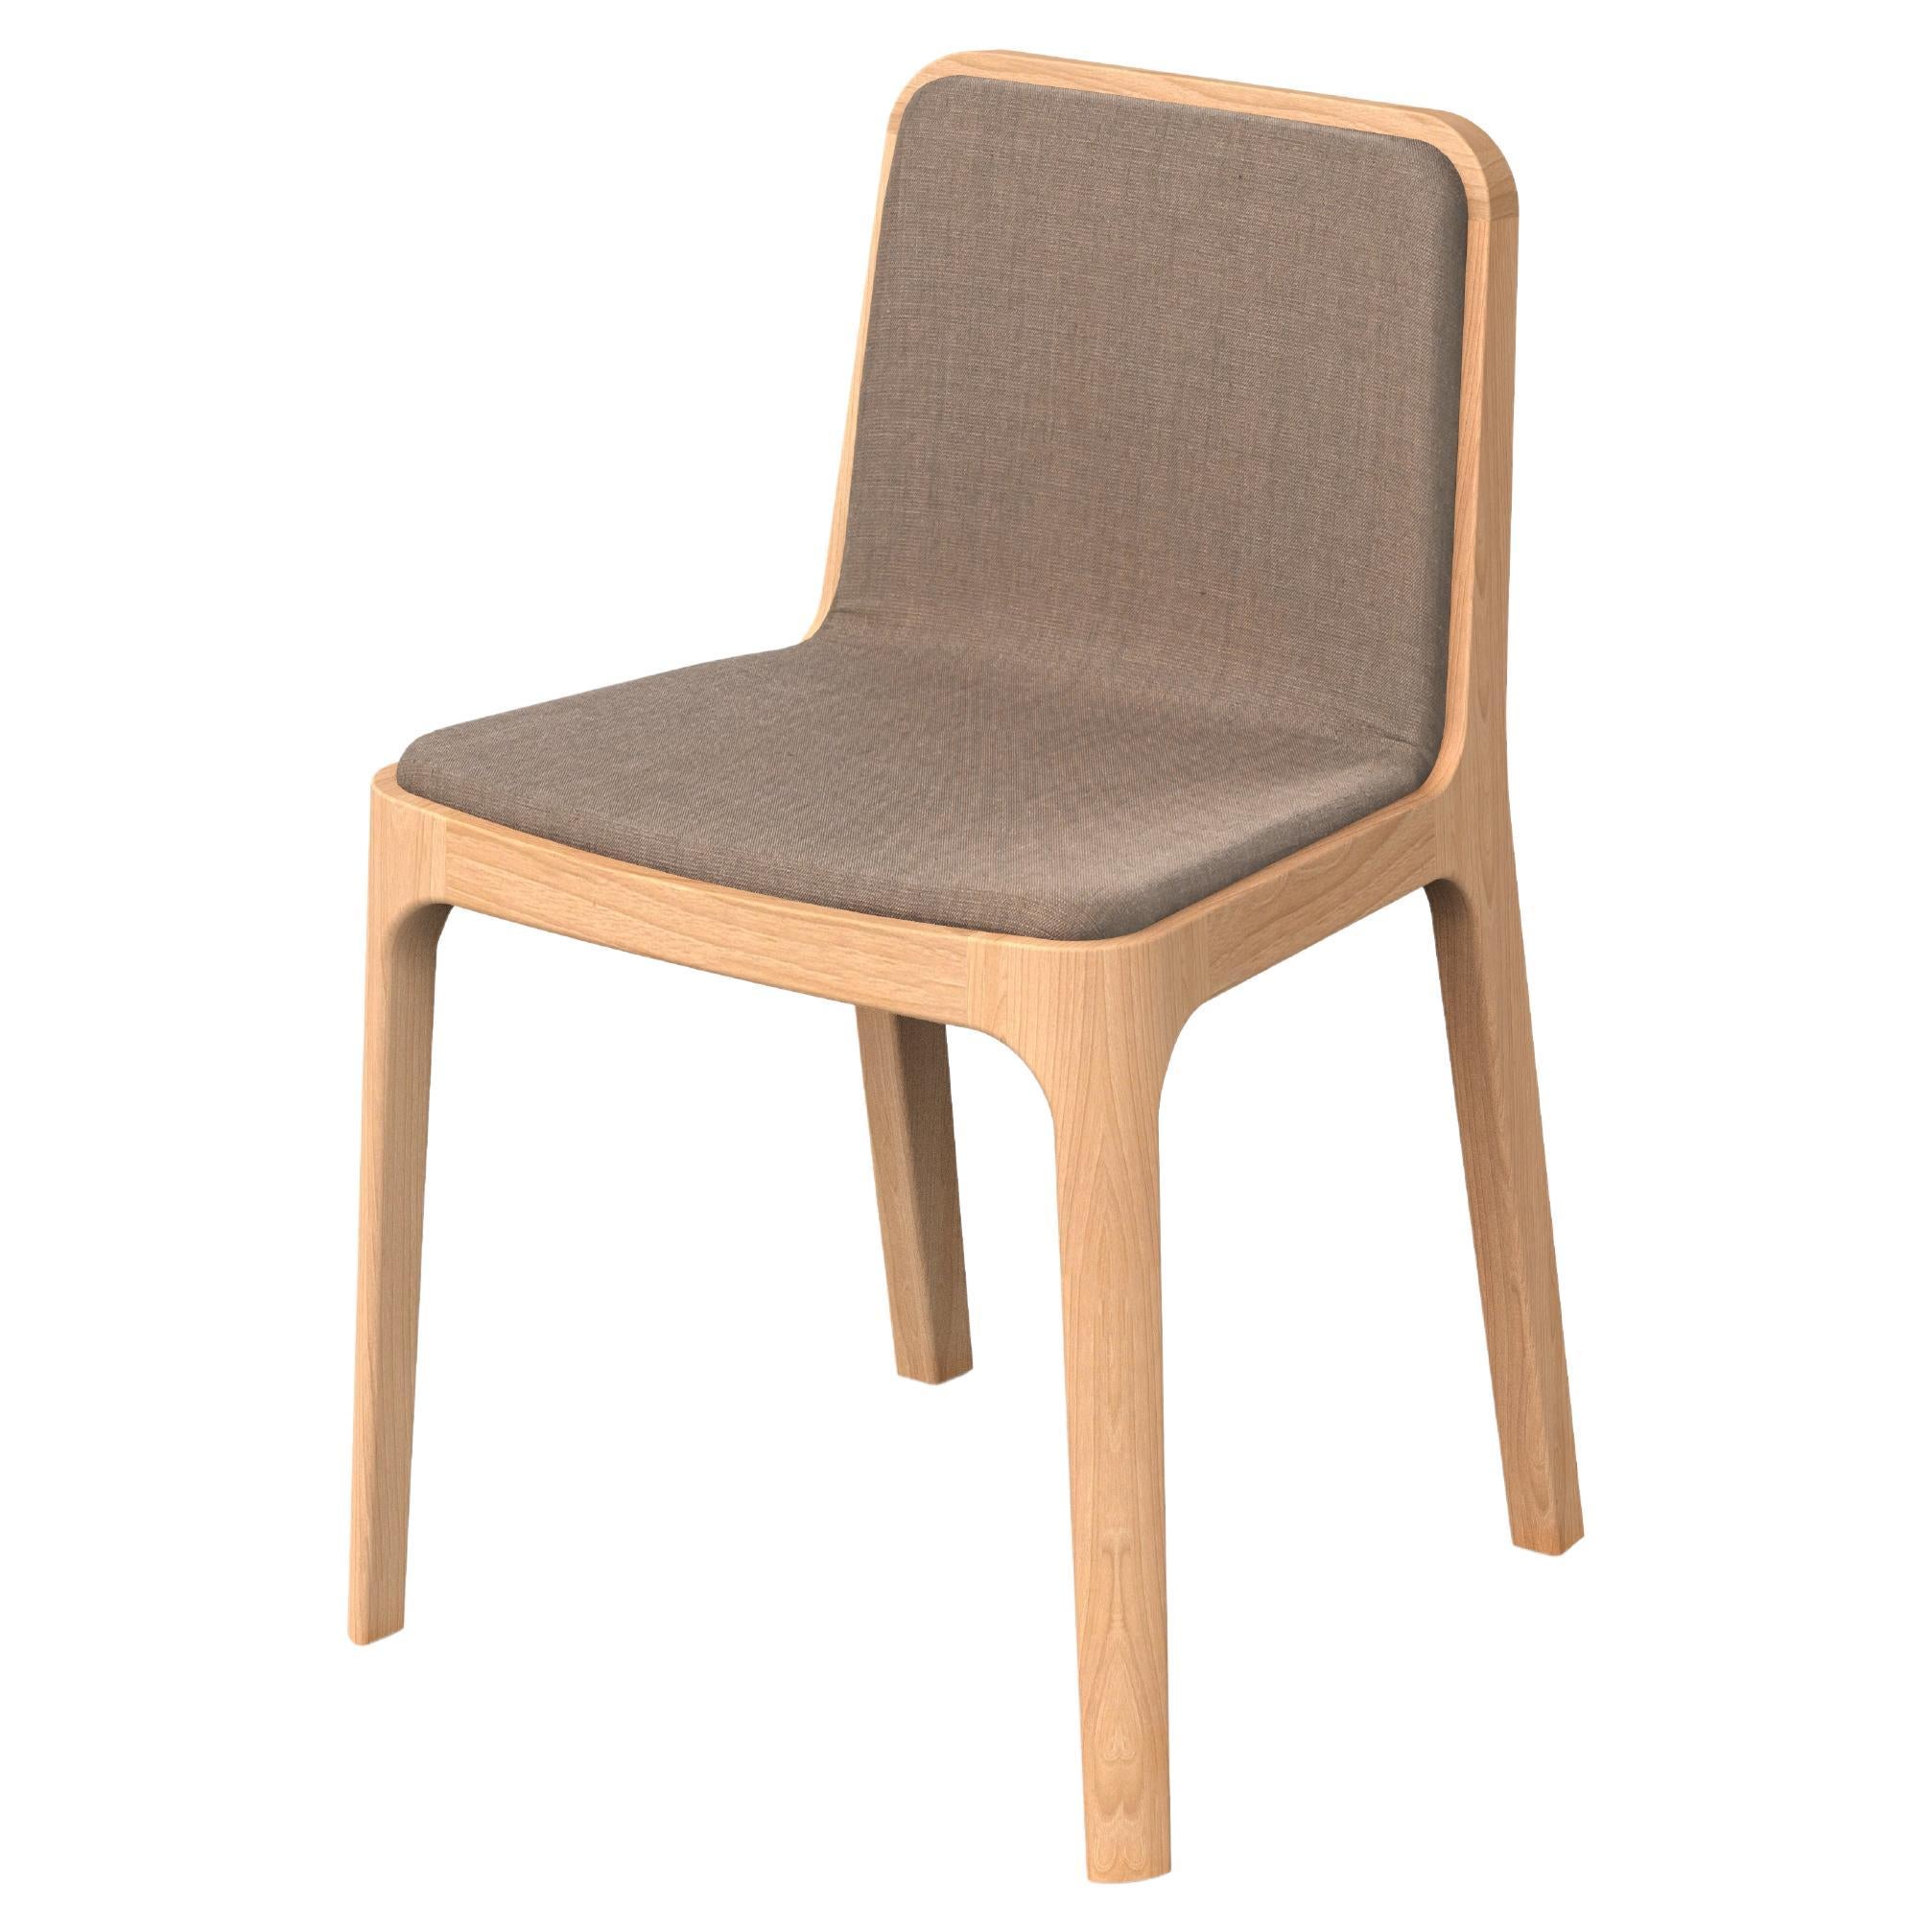 Minimalist Modern Chair in Beech Wood Fabric Upholstery For Sale